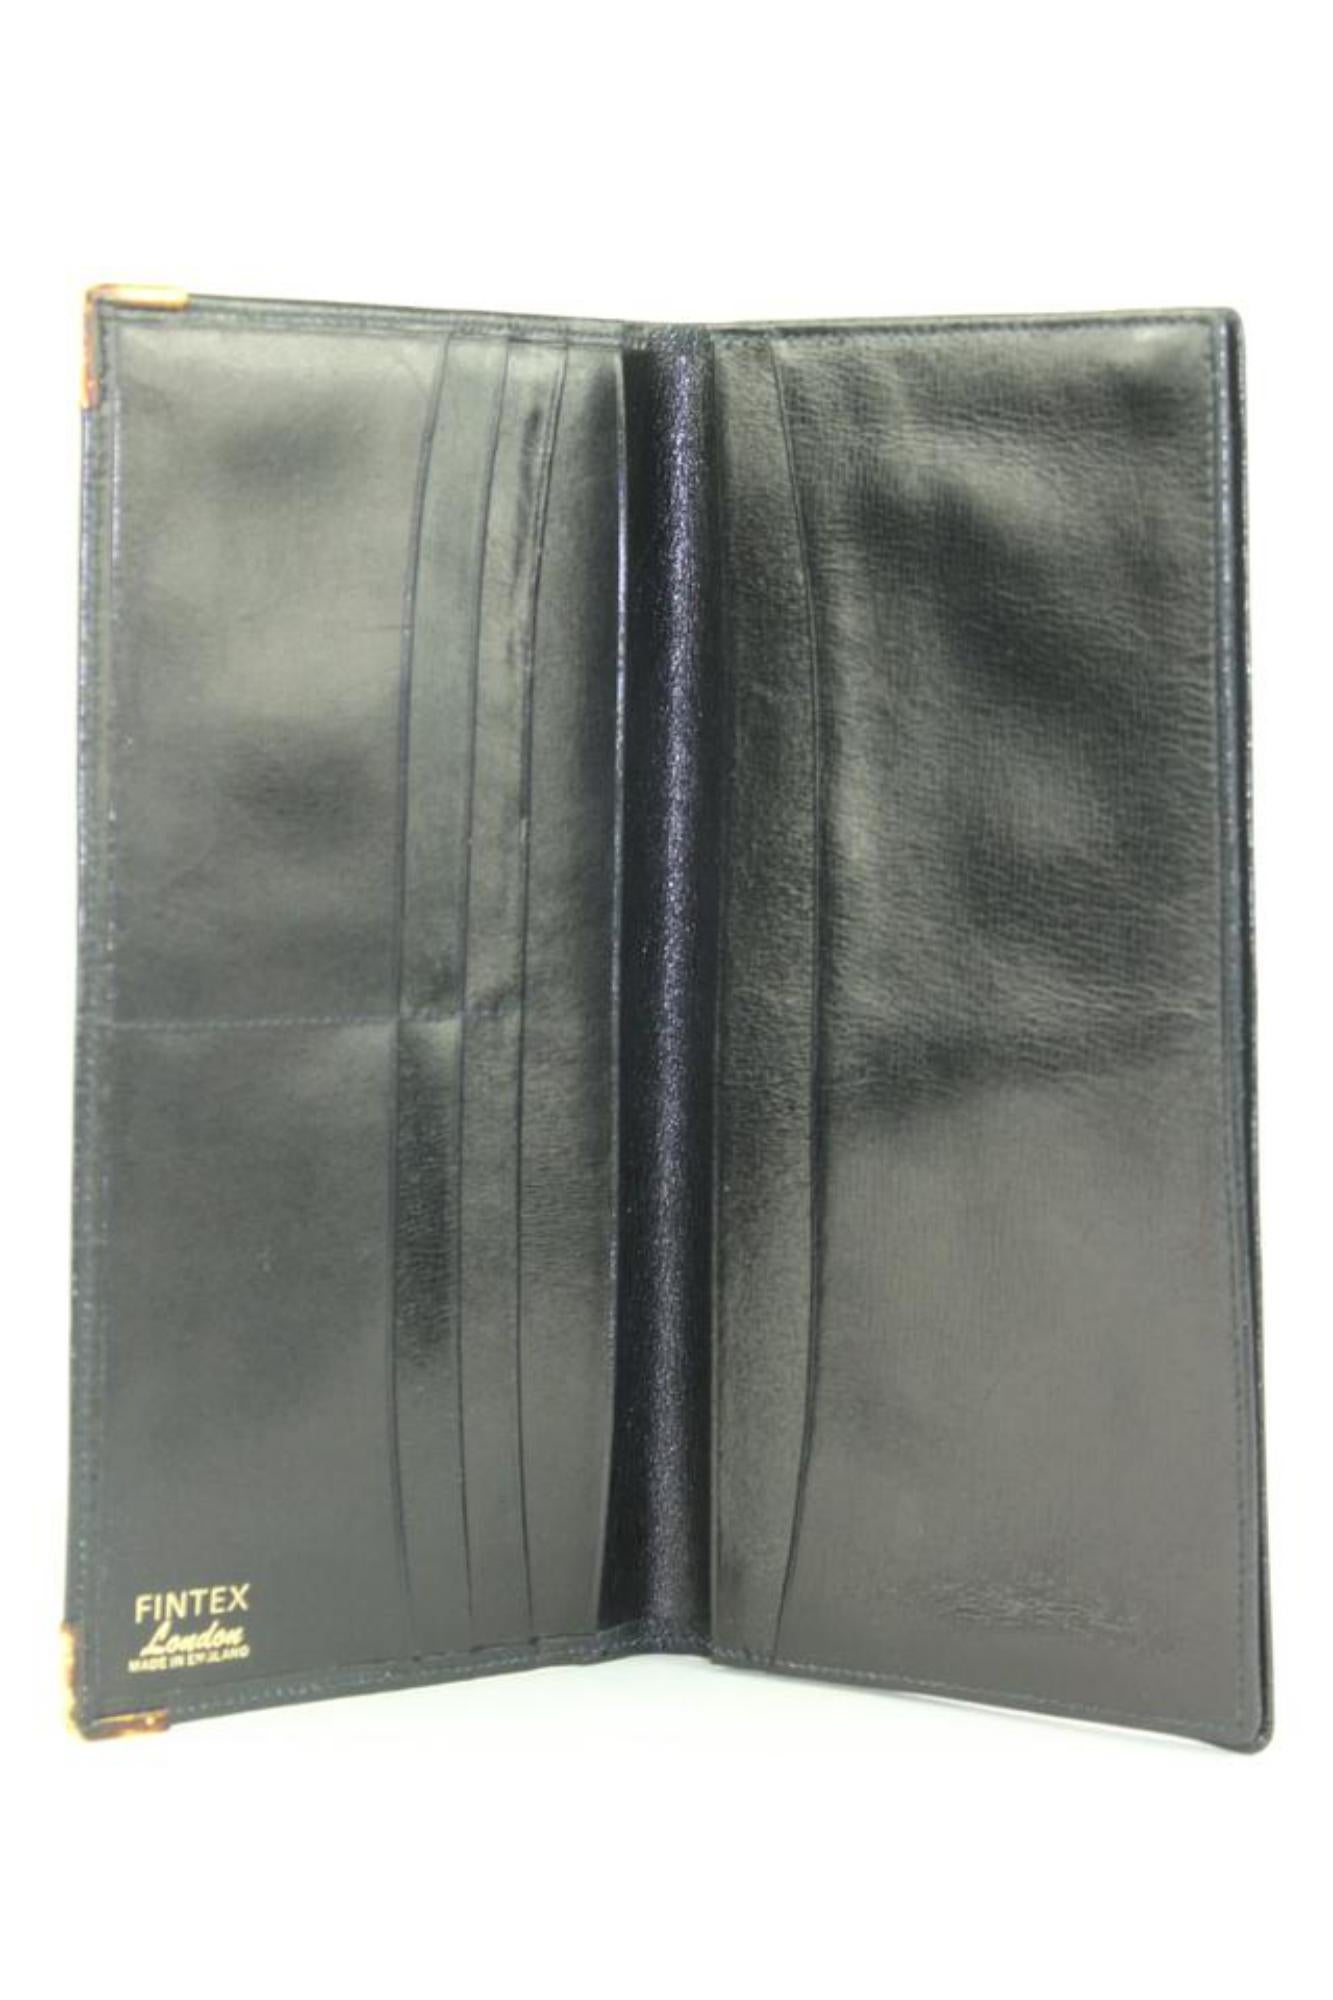 Women's Other Fintex Black Leather Wallet 7F1026 For Sale